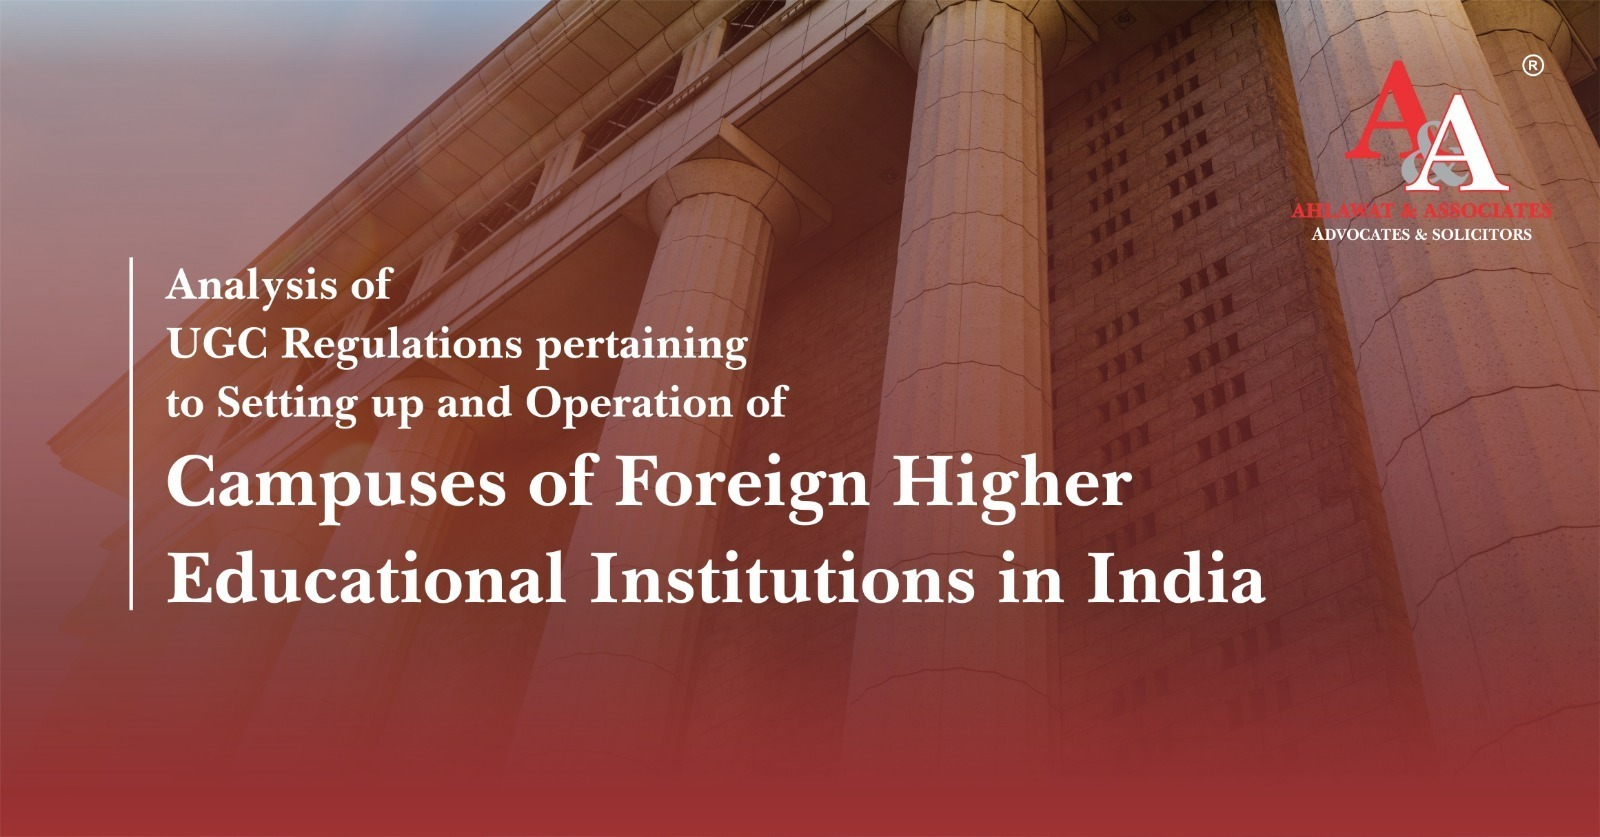 Analysis of UGC Regulations pertaining to Setting up and Operation of Campuses of Foreign Higher Educational Institutions in India